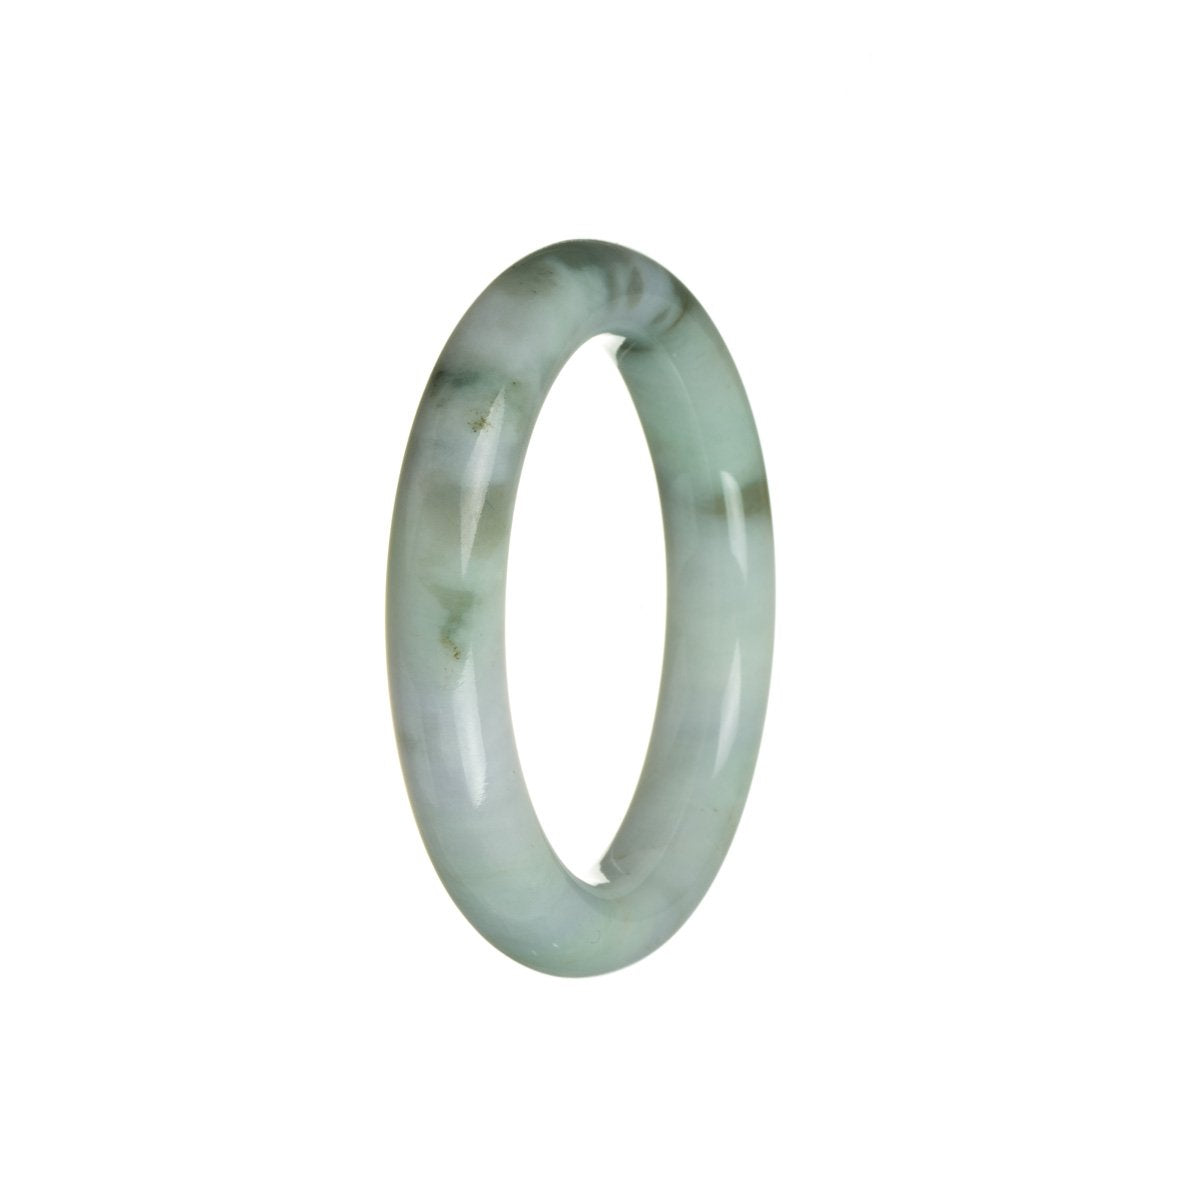 A stunning green, lavender, and white jadeite bracelet with a semi round shape, measuring 52mm. Perfect for adding a touch of elegance to any outfit.